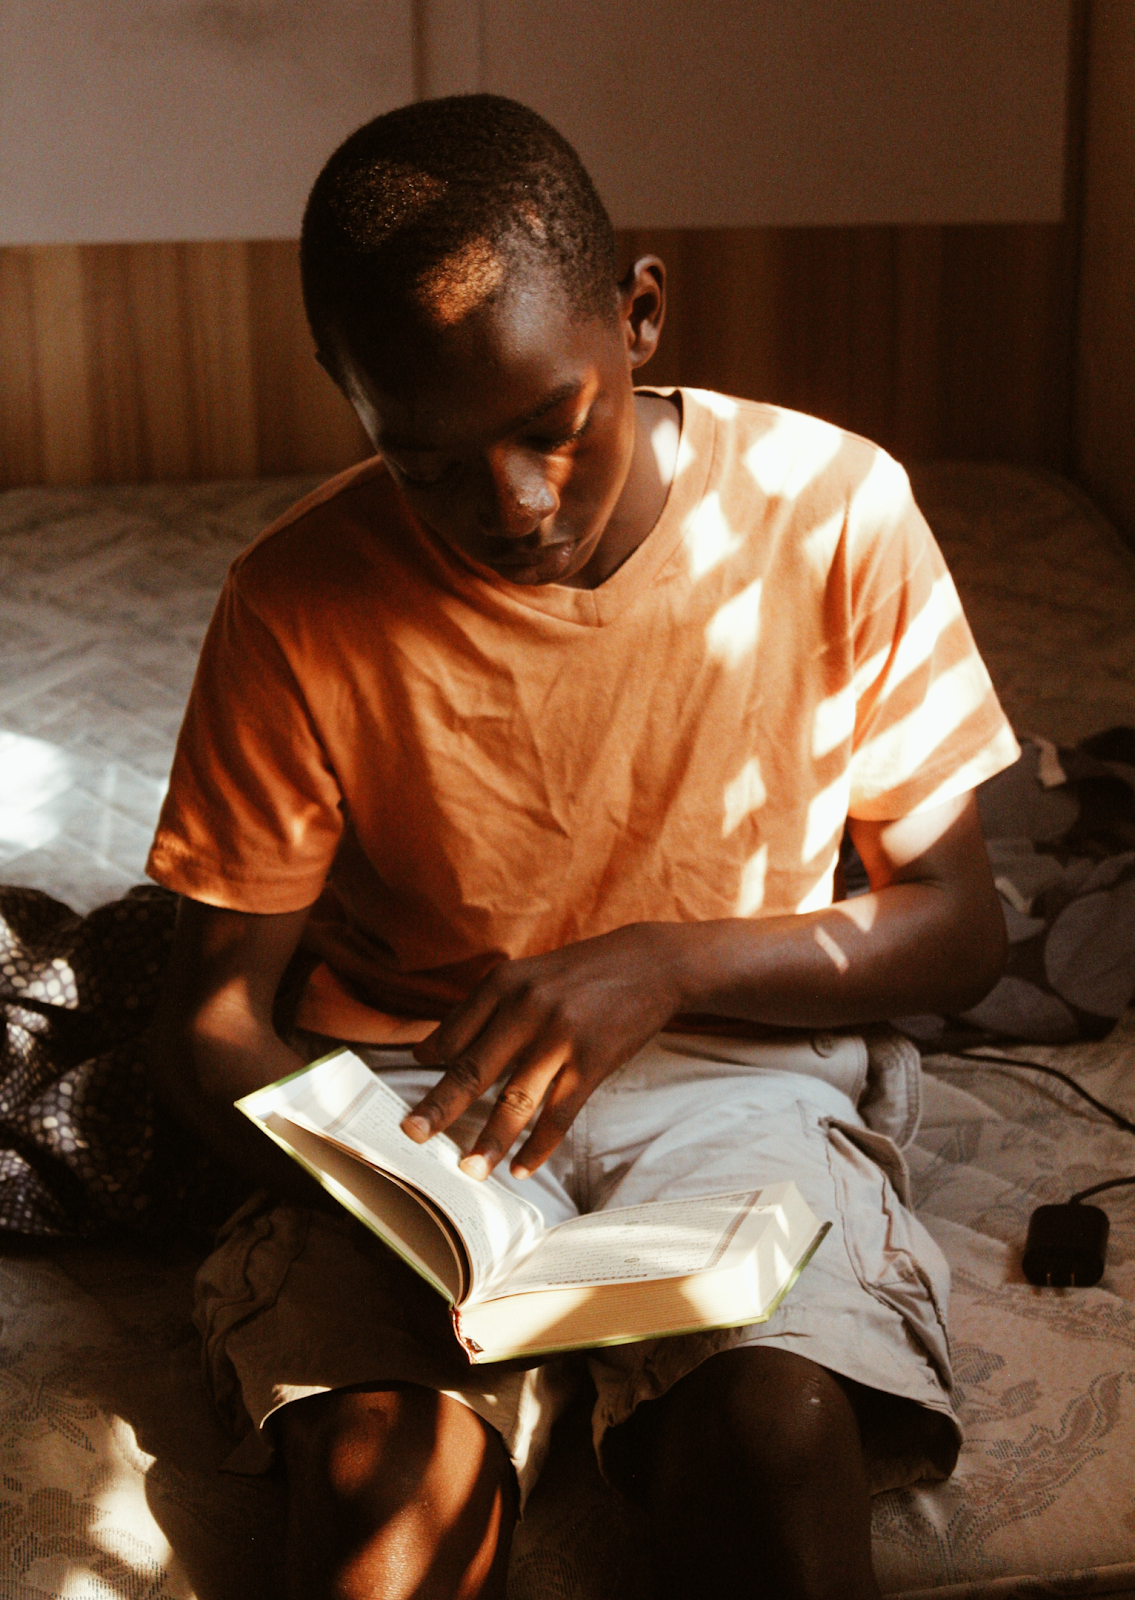 A boy reading a book while sitting on a bed.